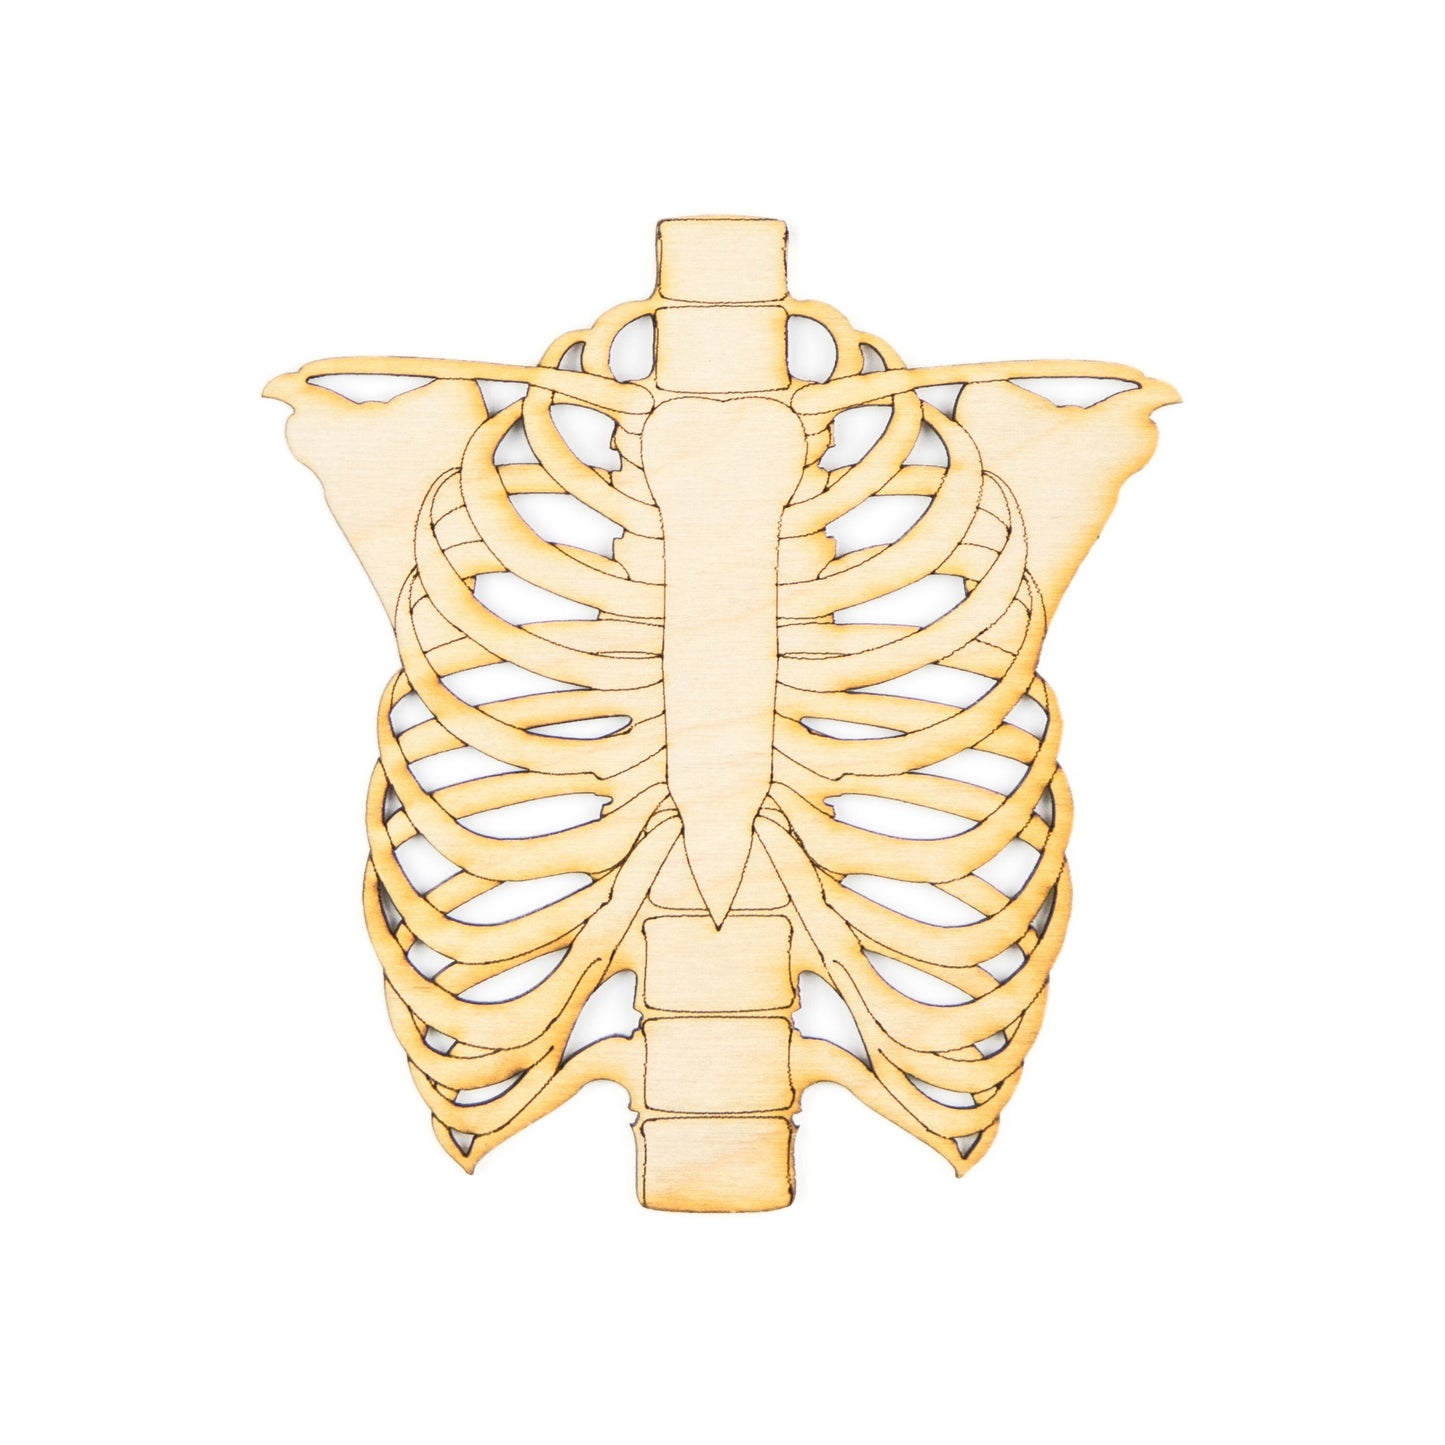 Ribcage Detailed Wood Cutout - Ideal for Anatomical, Gothic, or Halloween Décor